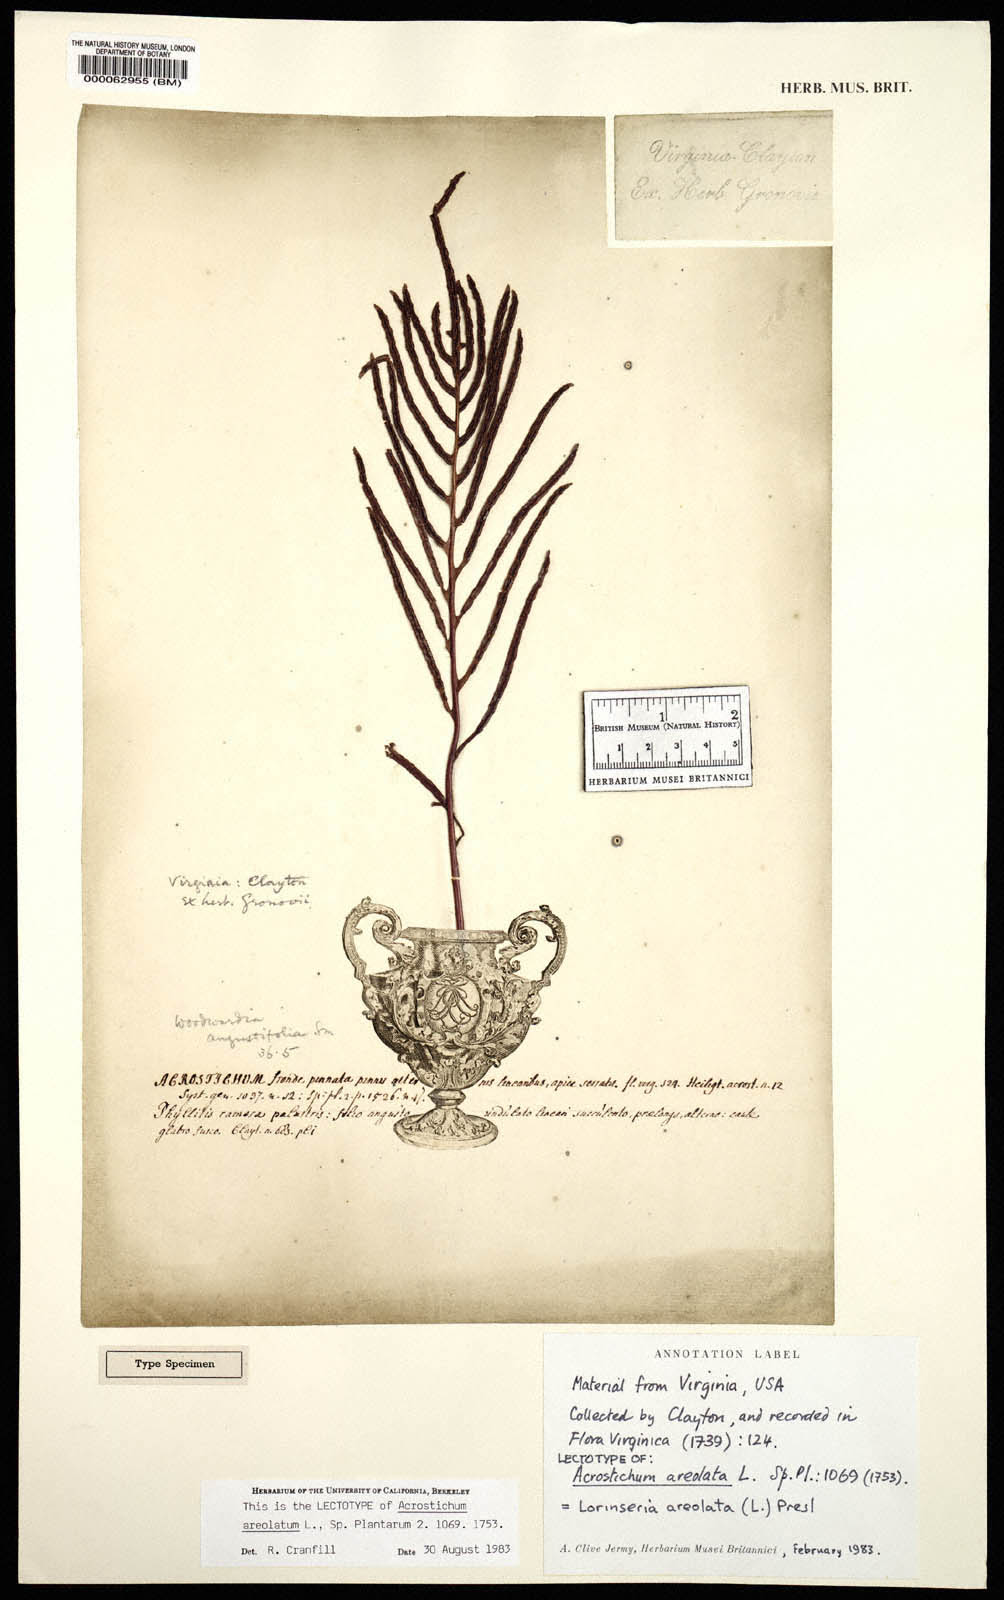 https://www.nhm.ac.uk/resources/research-curation/projects/clayton-herbarium/lgimages/BM000062955.JPG